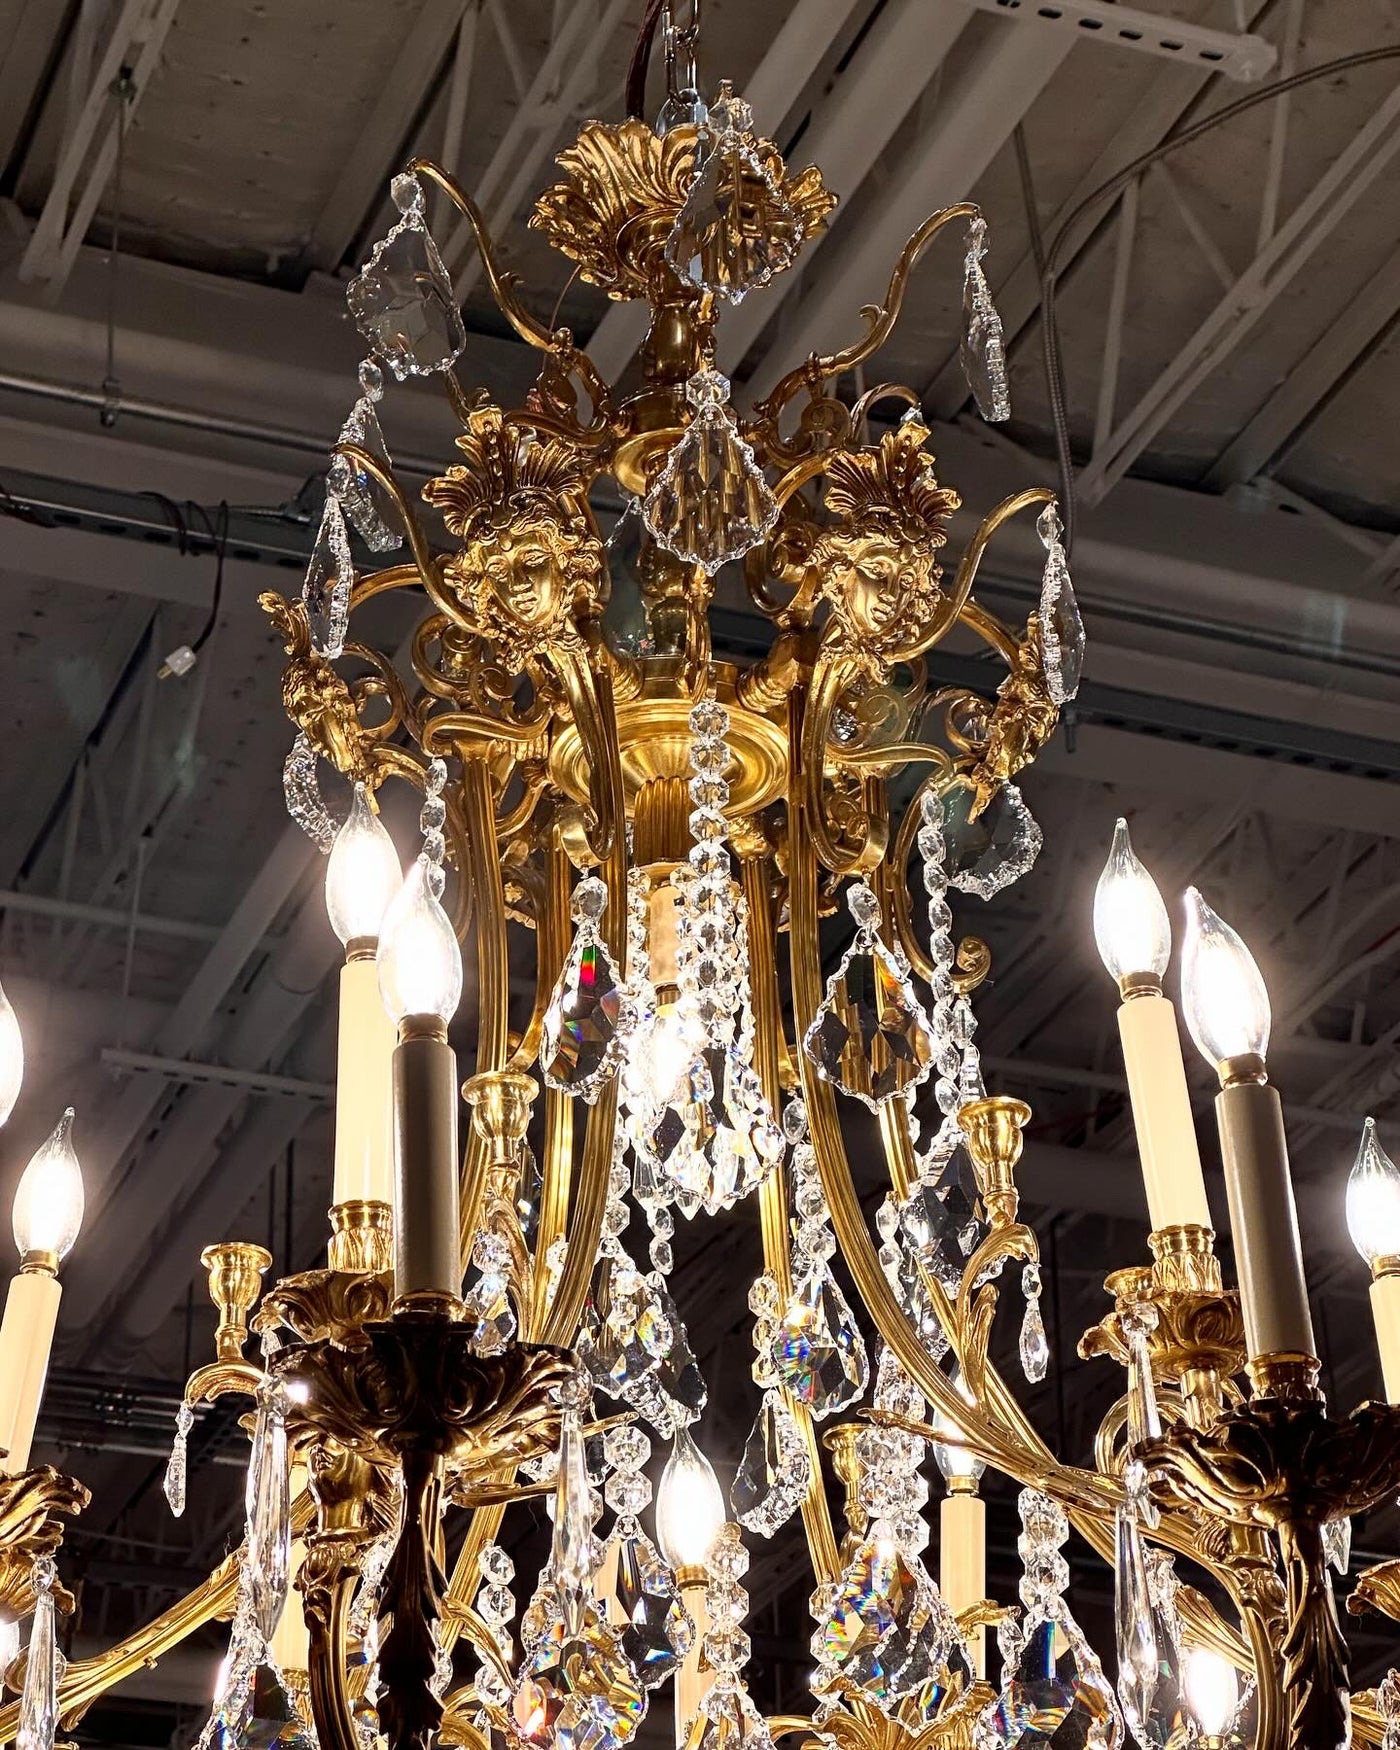 19th Century Chandelier with Faces and Swarovski Crystals